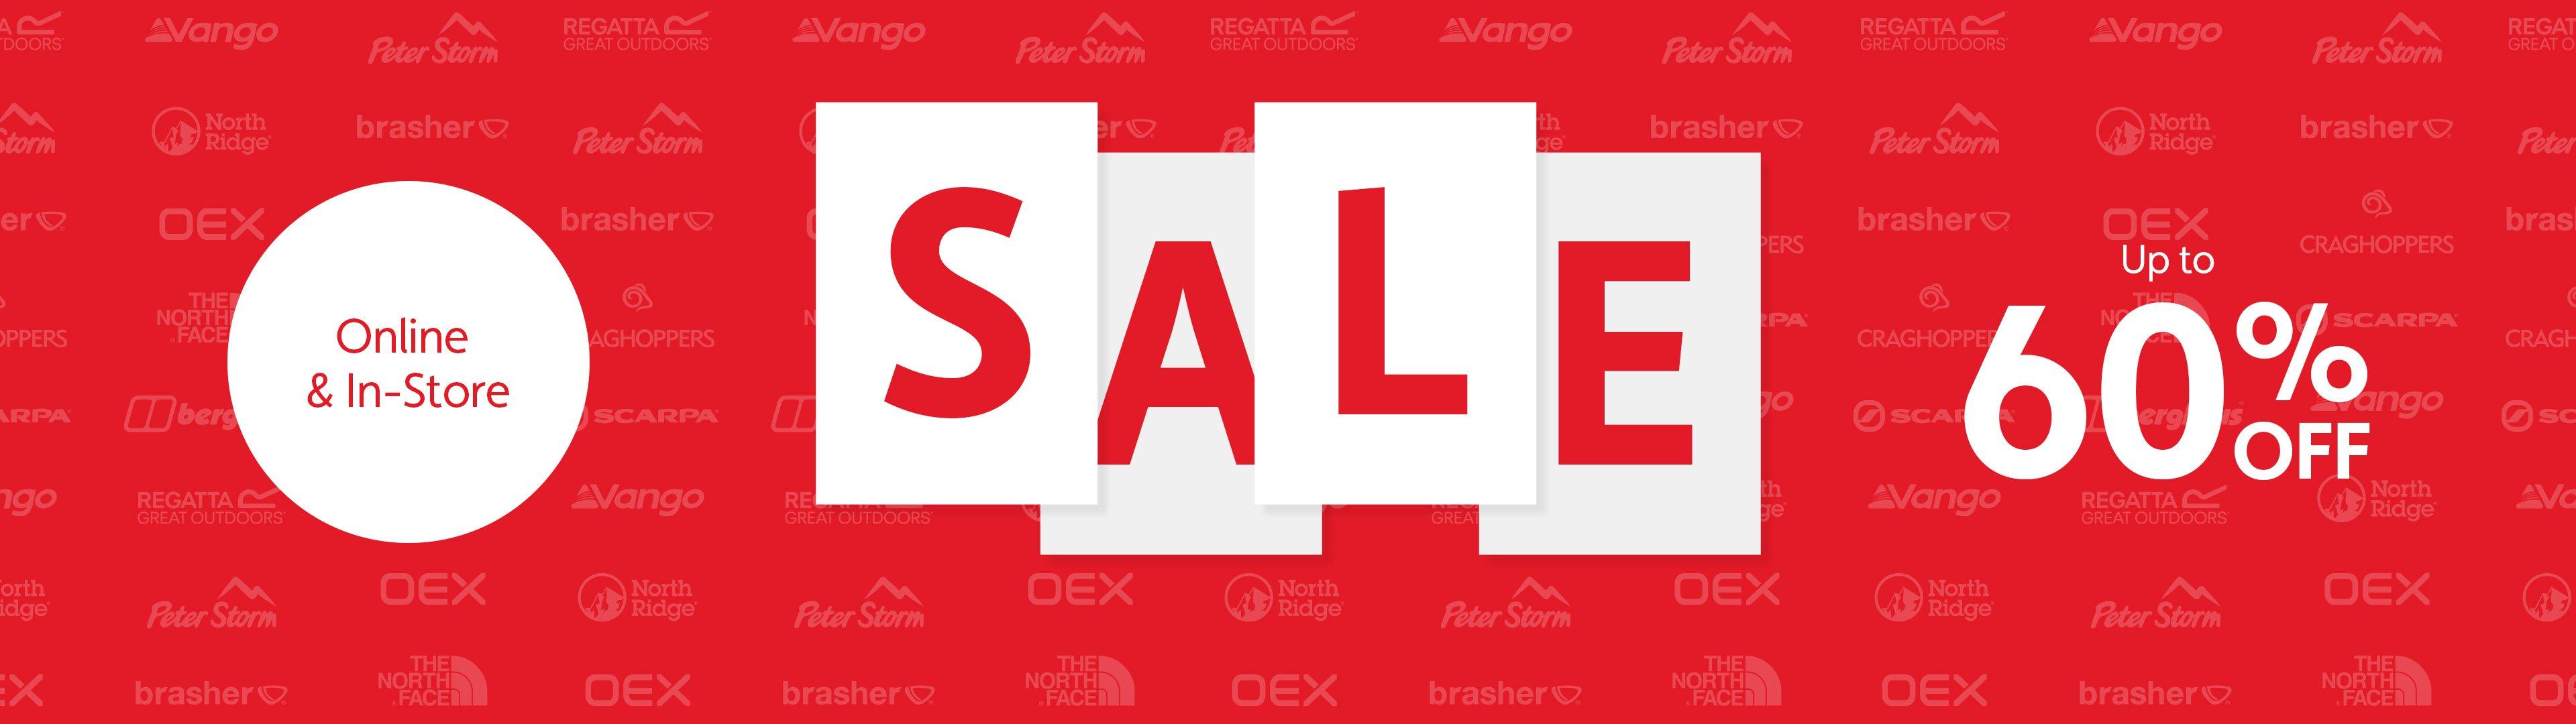 Sale – Up to 60% Off All Departments